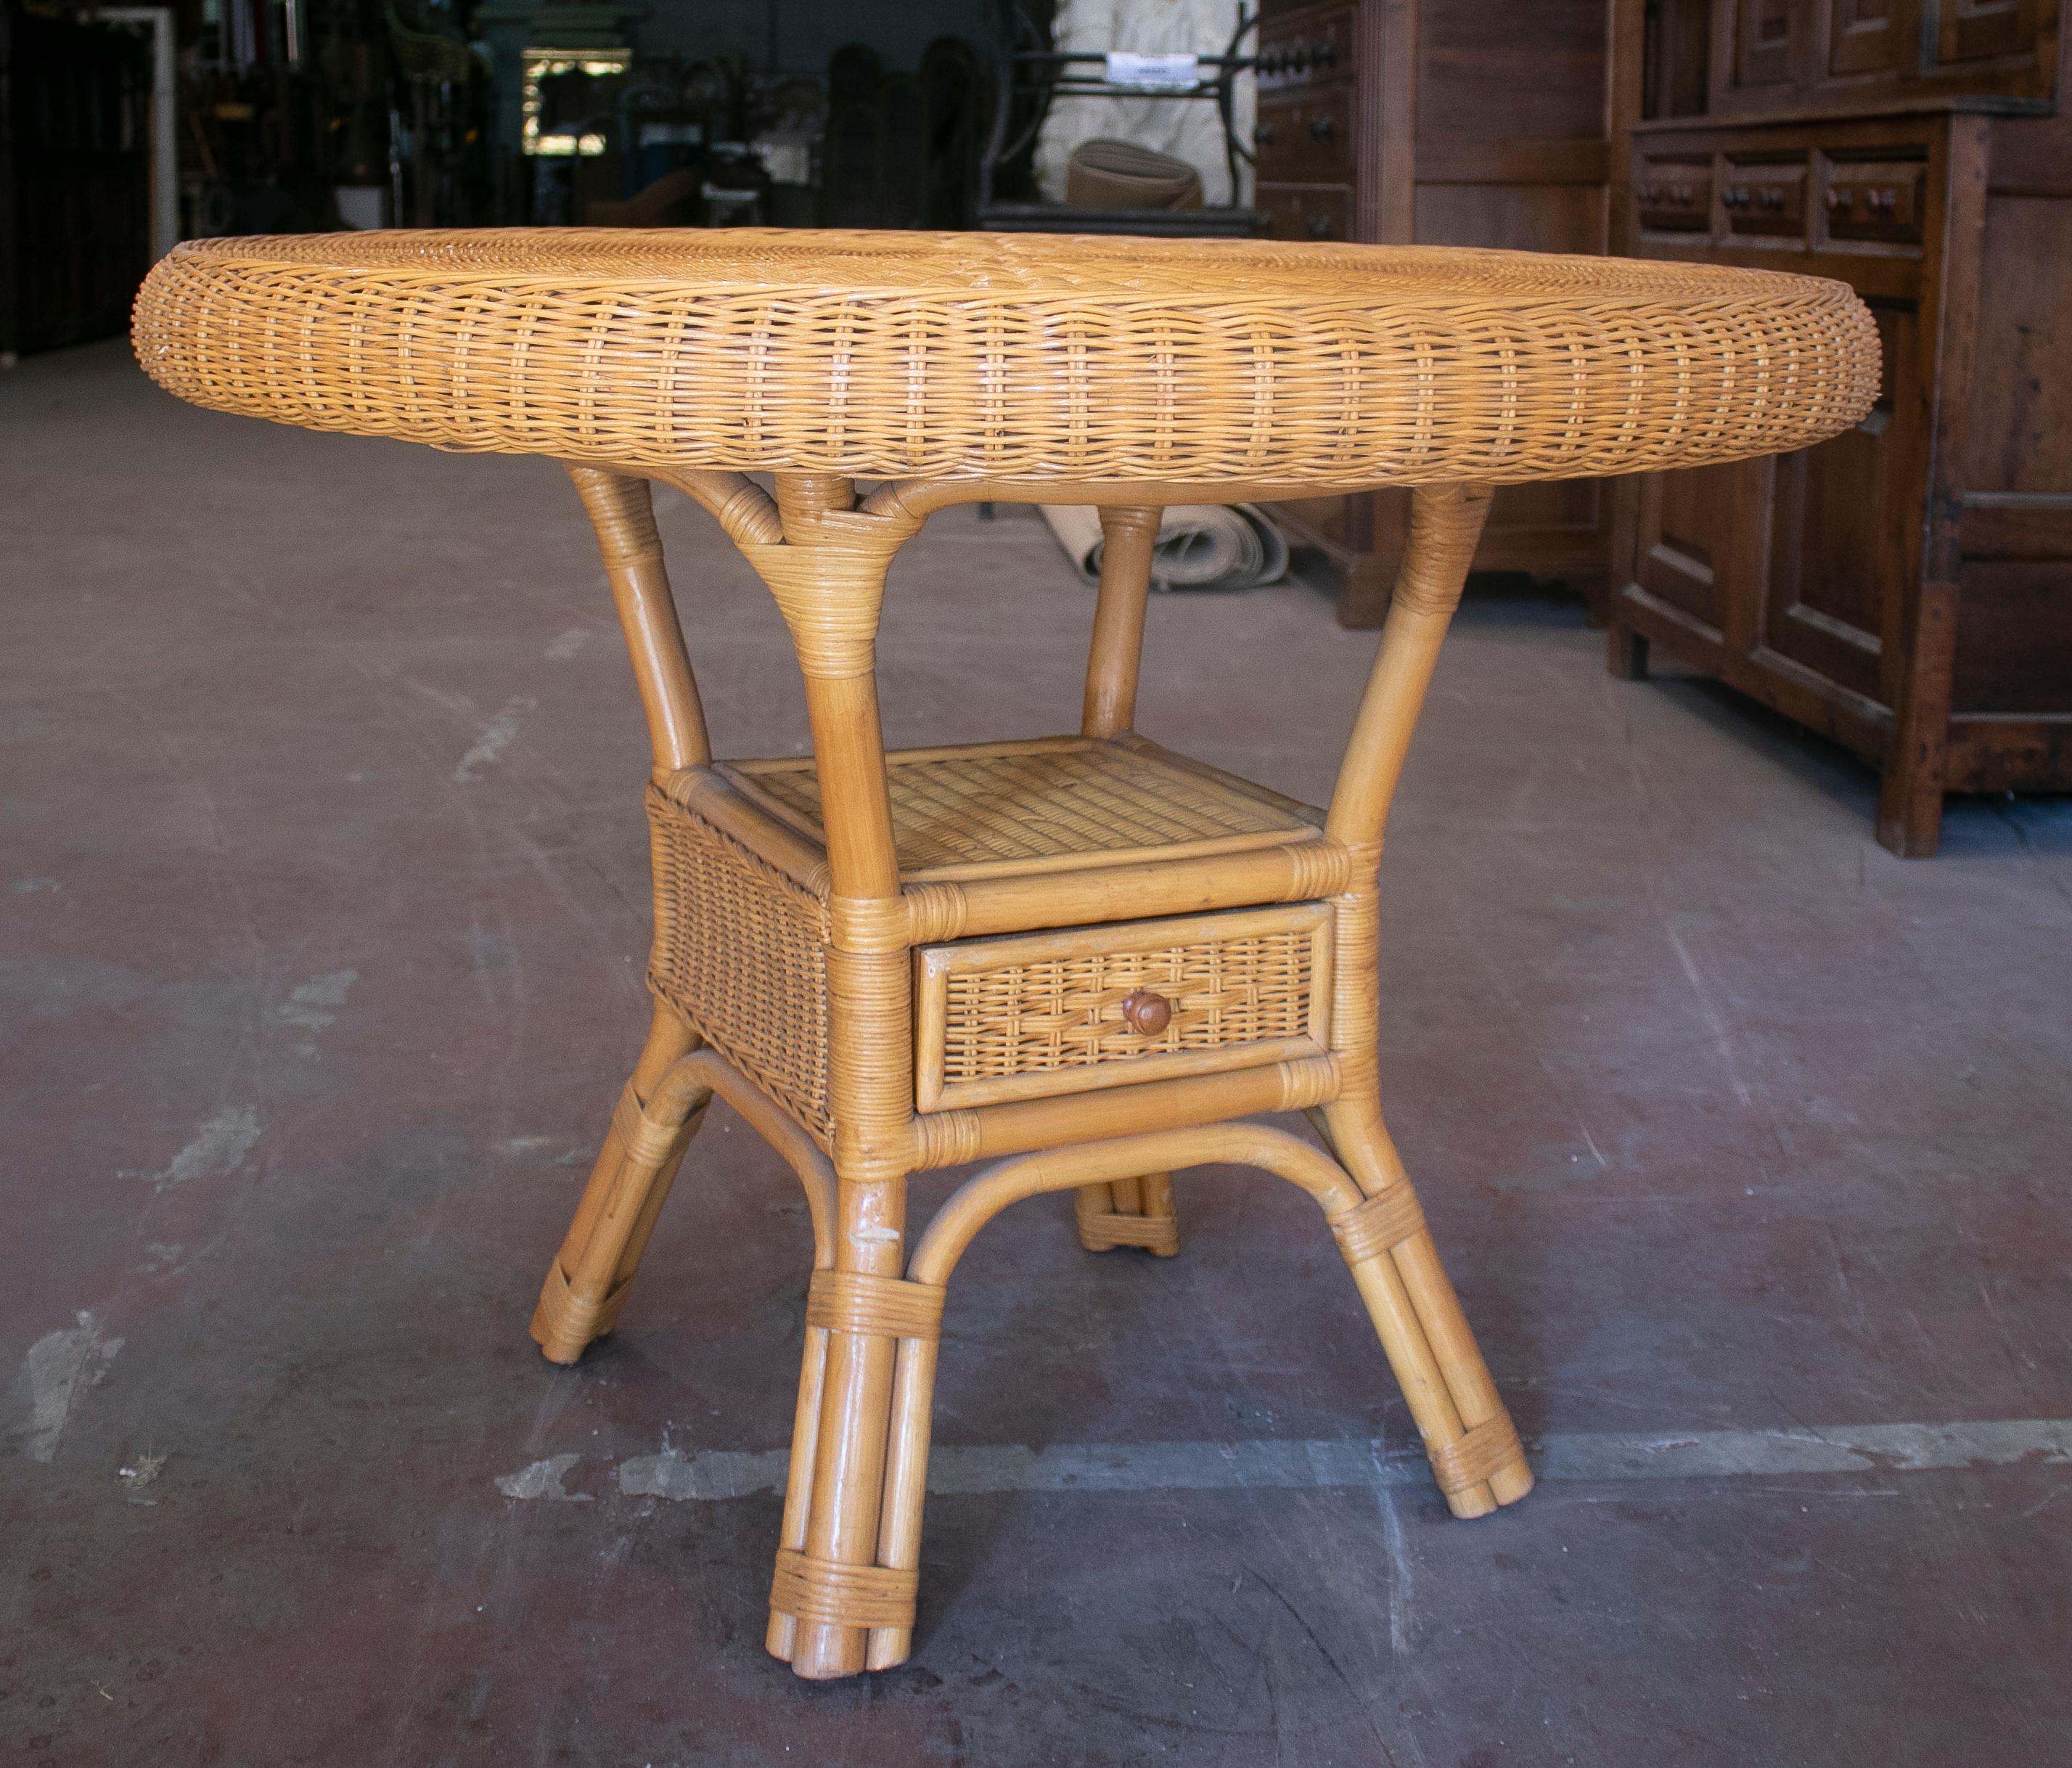 Vintage 1970s Spanish hand woven wicker one drawer round table.